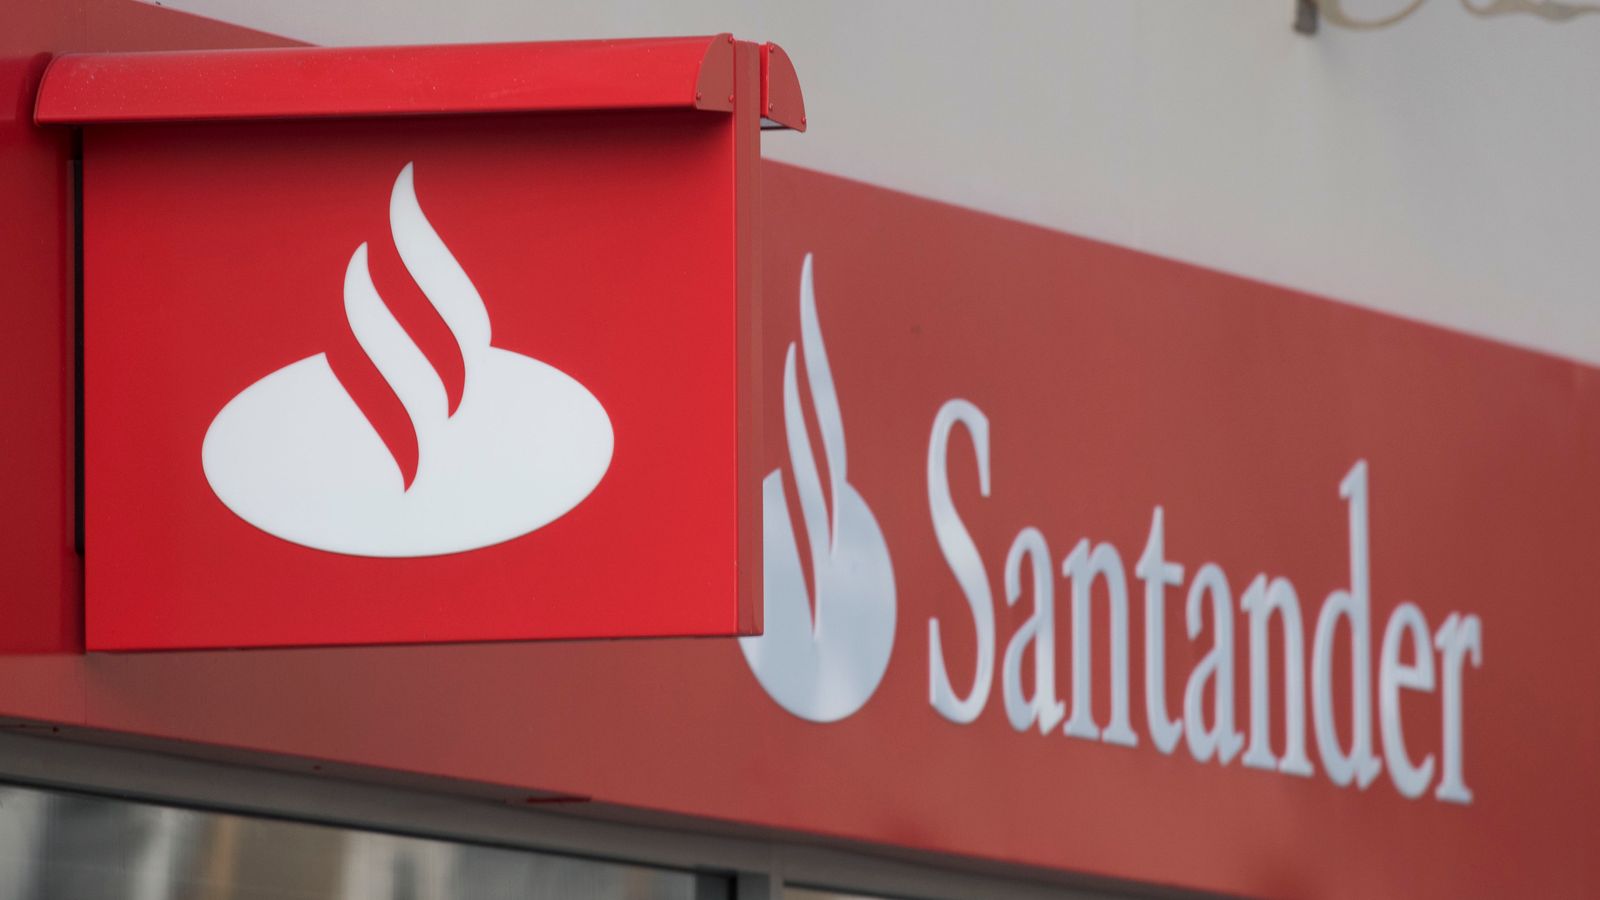 Santander apologises for problems with app, ATMs, cards and other services